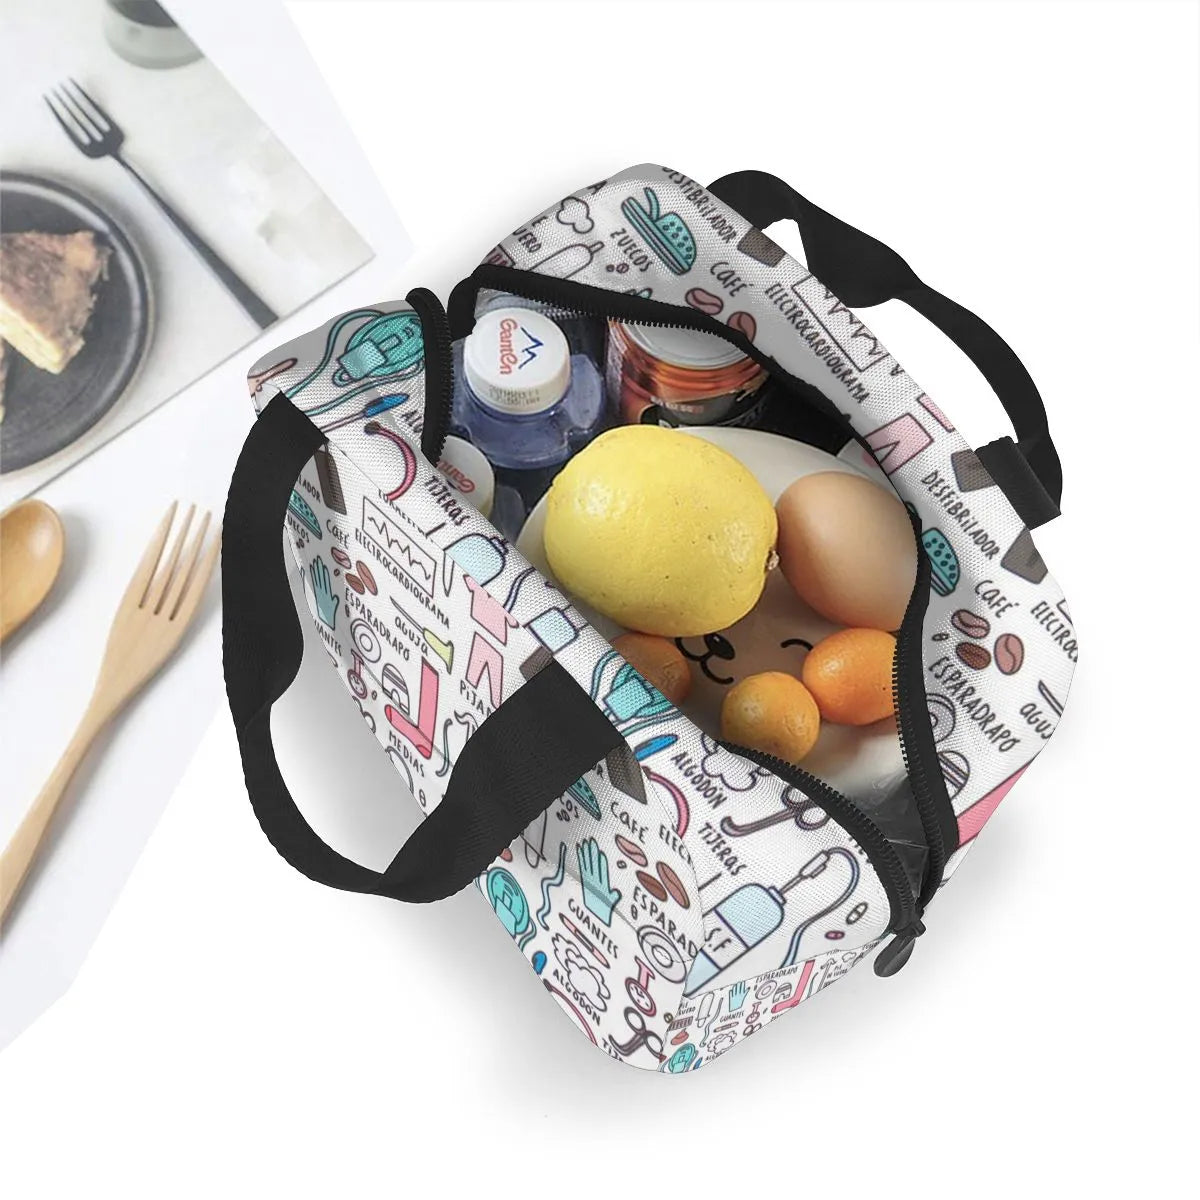 1Pcs New Arrive Fresh Cooler Bag Doctors Nurse Pattern Insulated Lunch Bags Women Food Cooler Warm Bento Box Tote For Kids